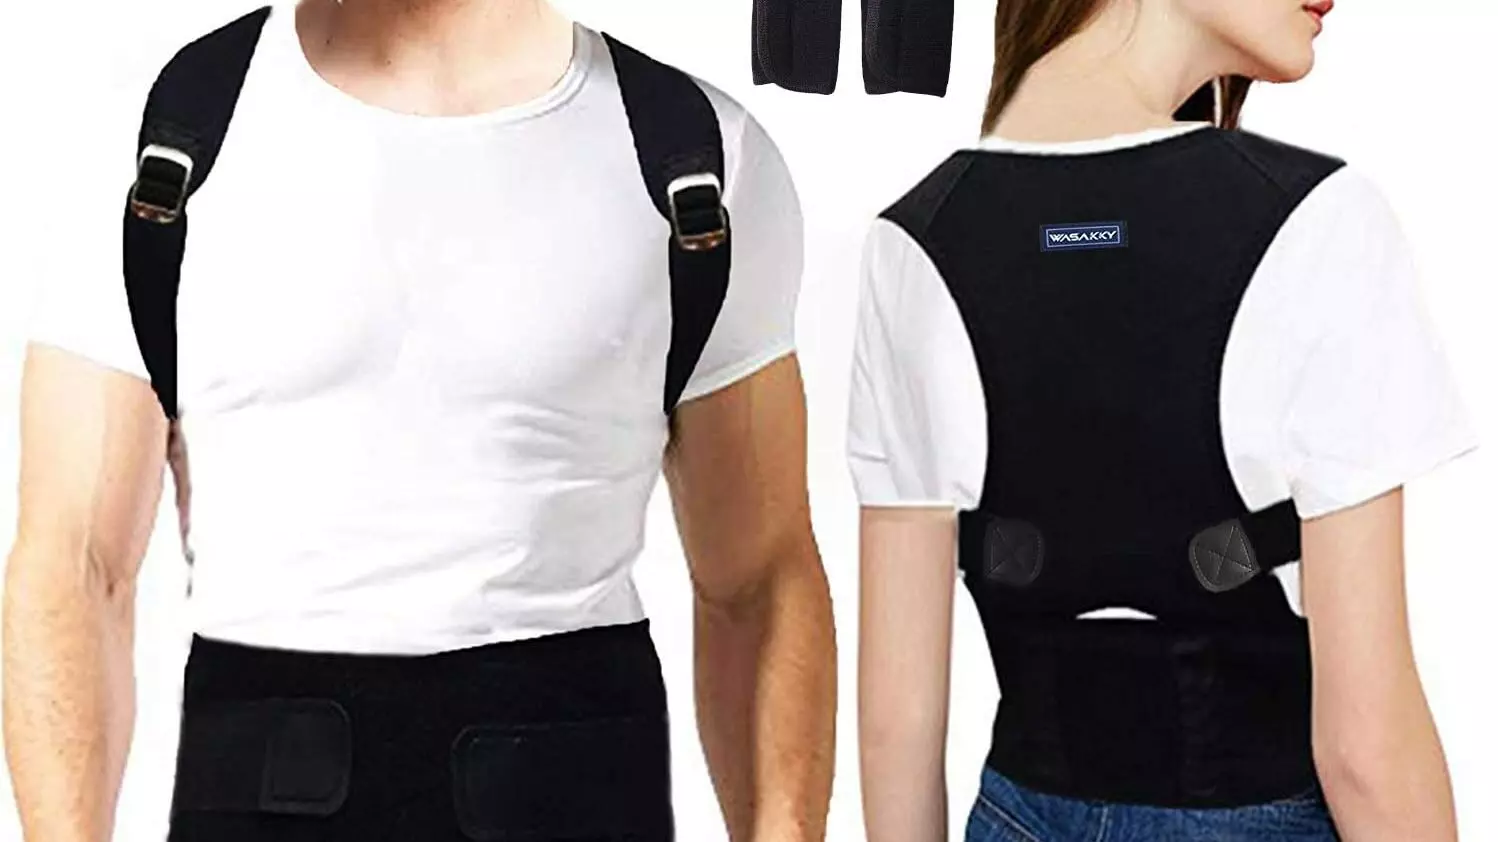 The Best Back Braces for Drivers (Review) in 2022